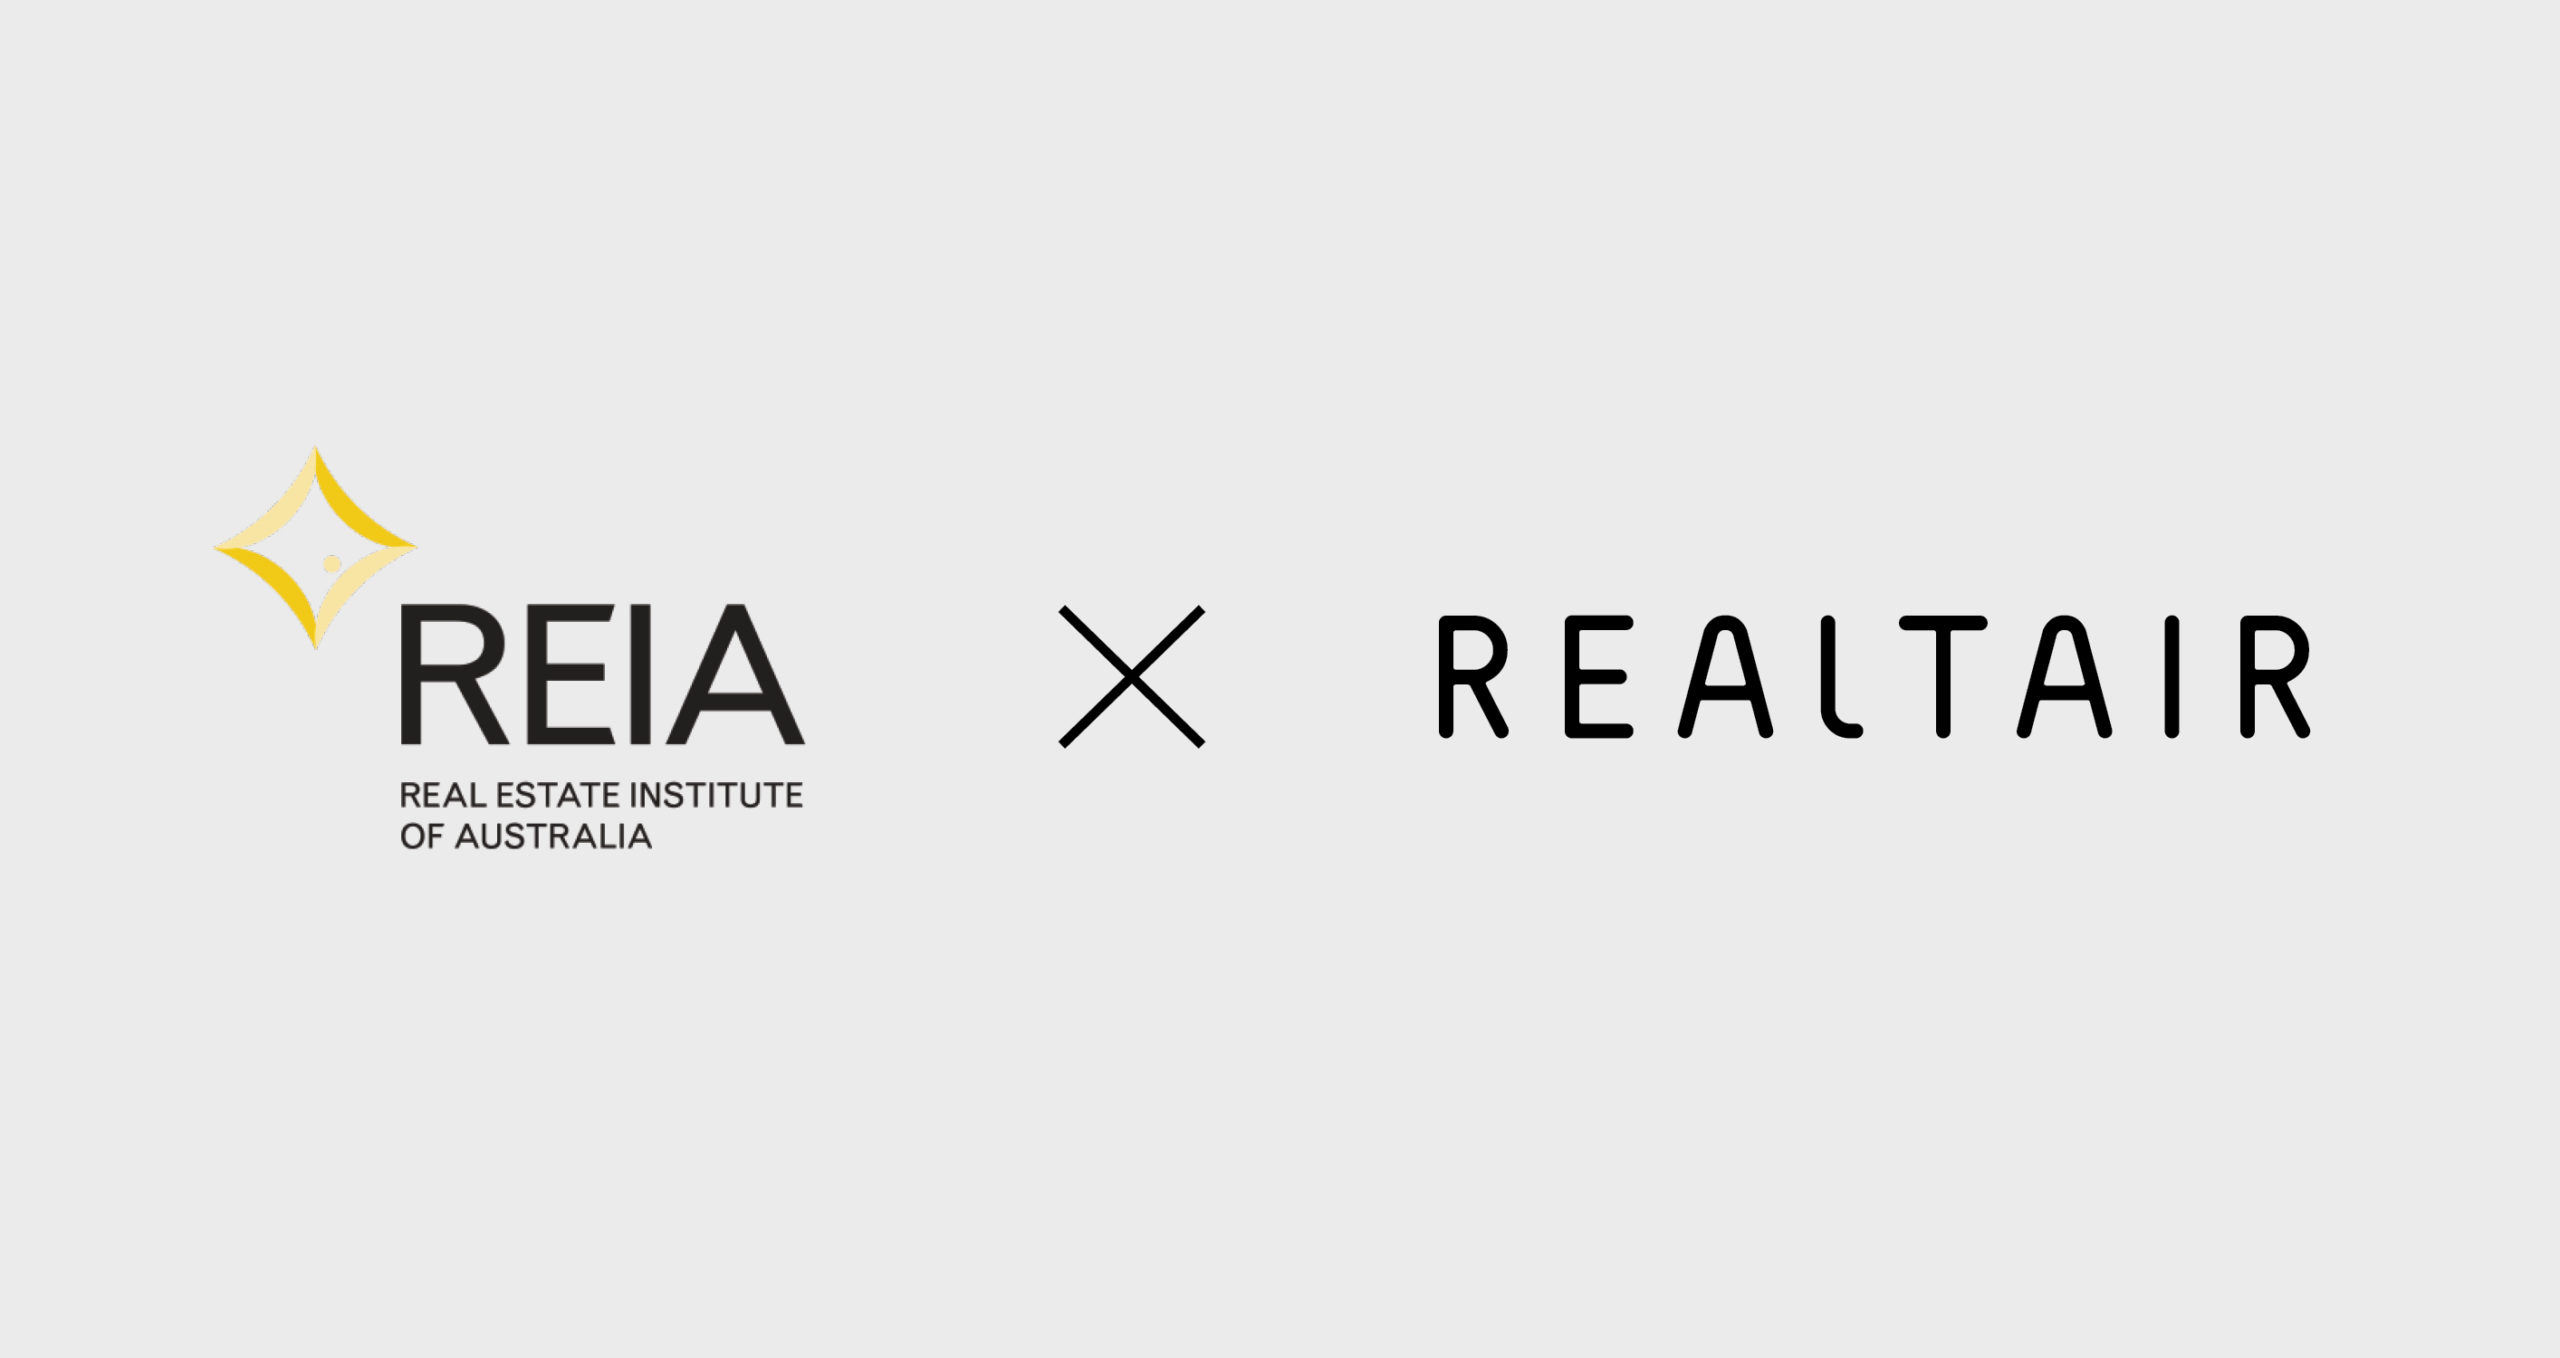 Realtair selected as advisors to the REIA in Project RE-ID